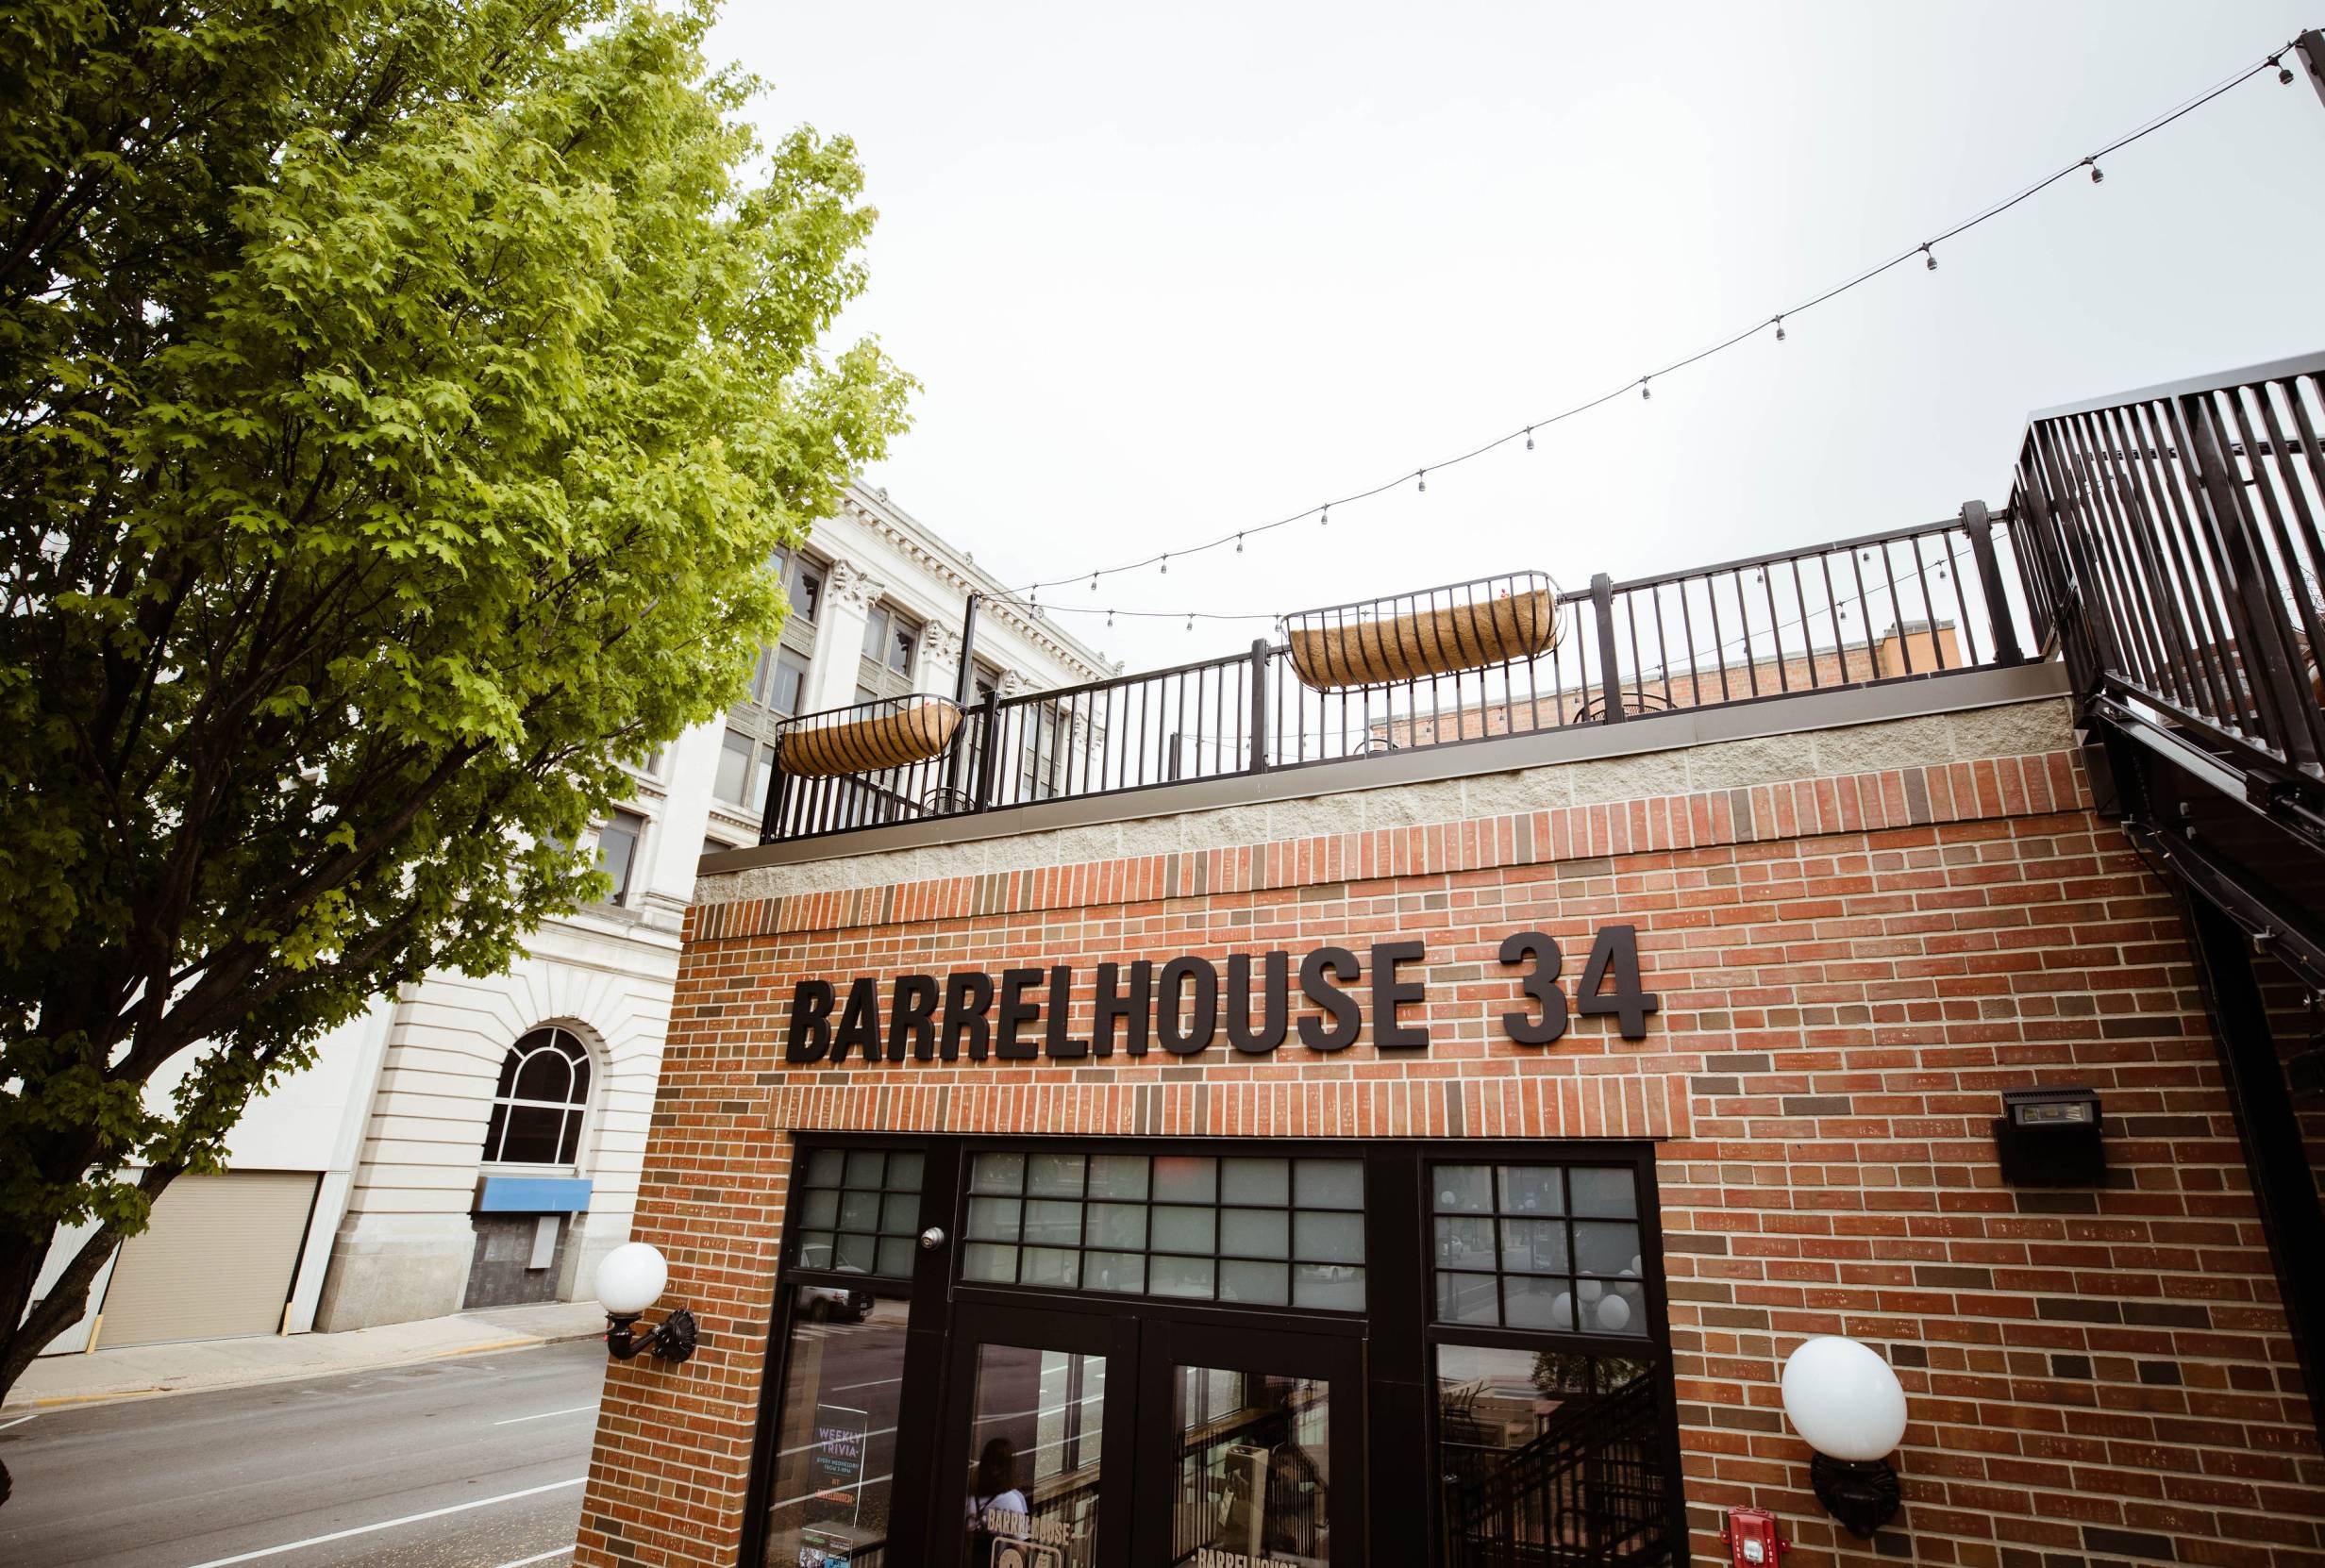 The exterior of Barrelhouse 34 is a brick building with a second floor for additional seating. Photo by Anna Longworth.